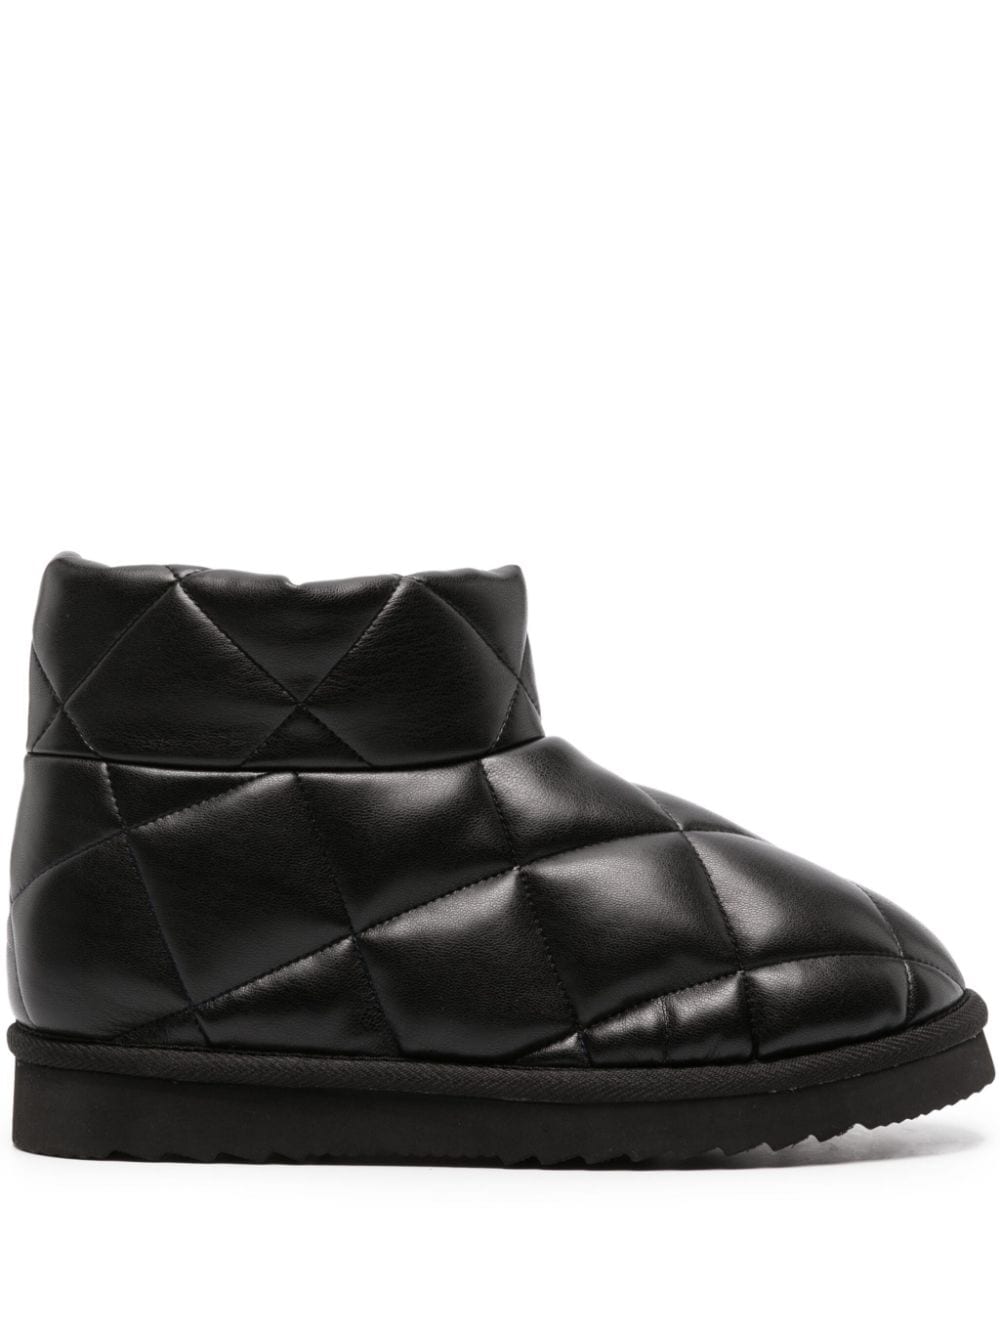 STAND STUDIO Beverley quilted ankle boots - Nero